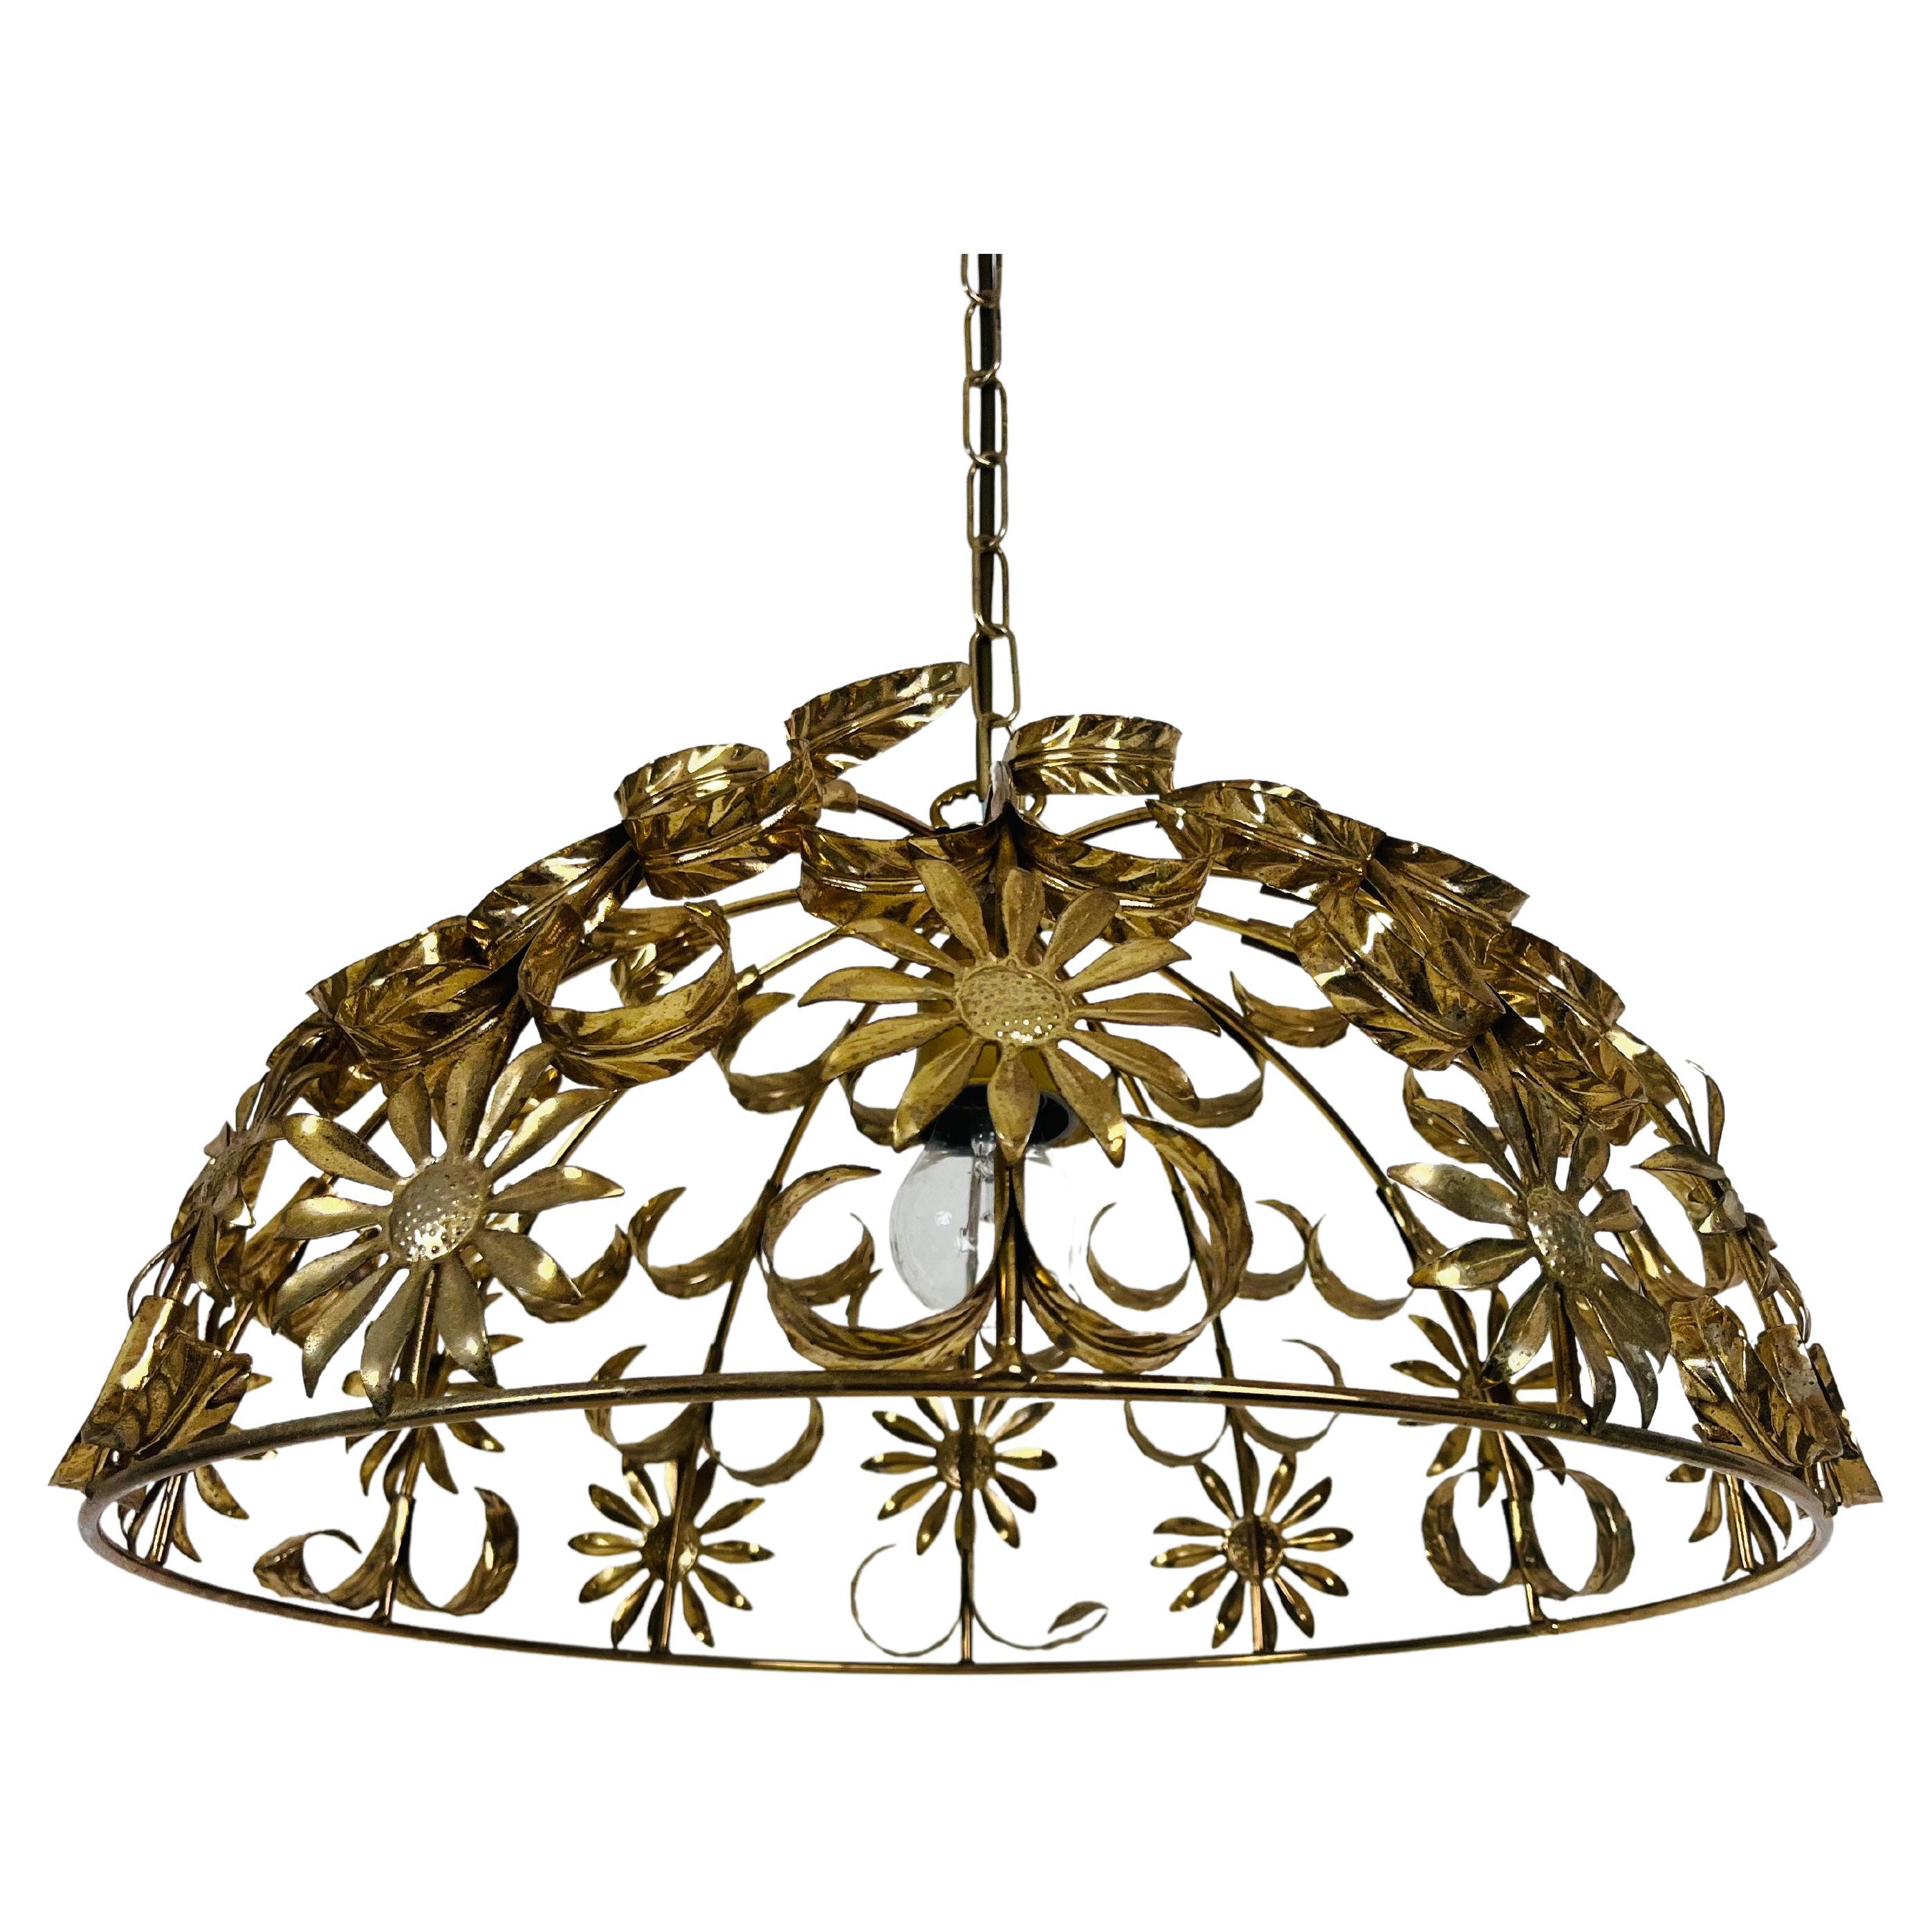 Florentine Flower Shape Pendant Lamp Attributed to Banci Firenze, 1970s For Sale